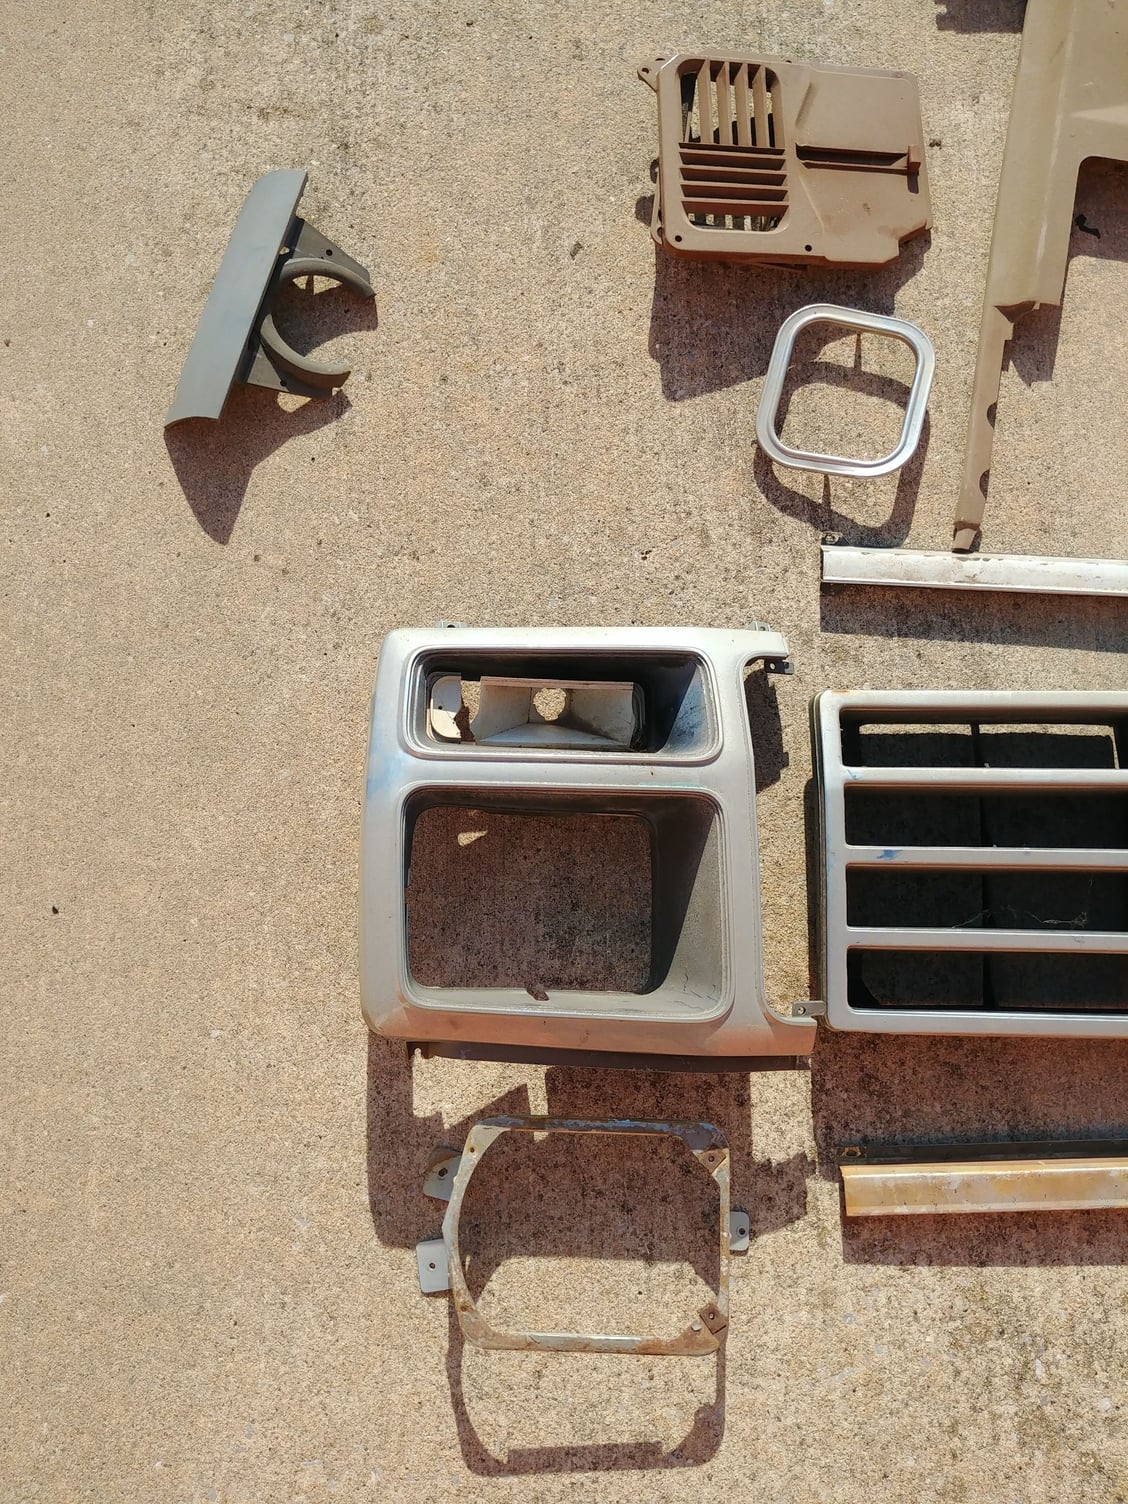 Miscellaneous - 7th Gen F-150 Grill, Headlight Bezels, Interior Kick Panel Vents - Used - 1980 to 1986 Ford F-150 - Moore, OK 73160, United States